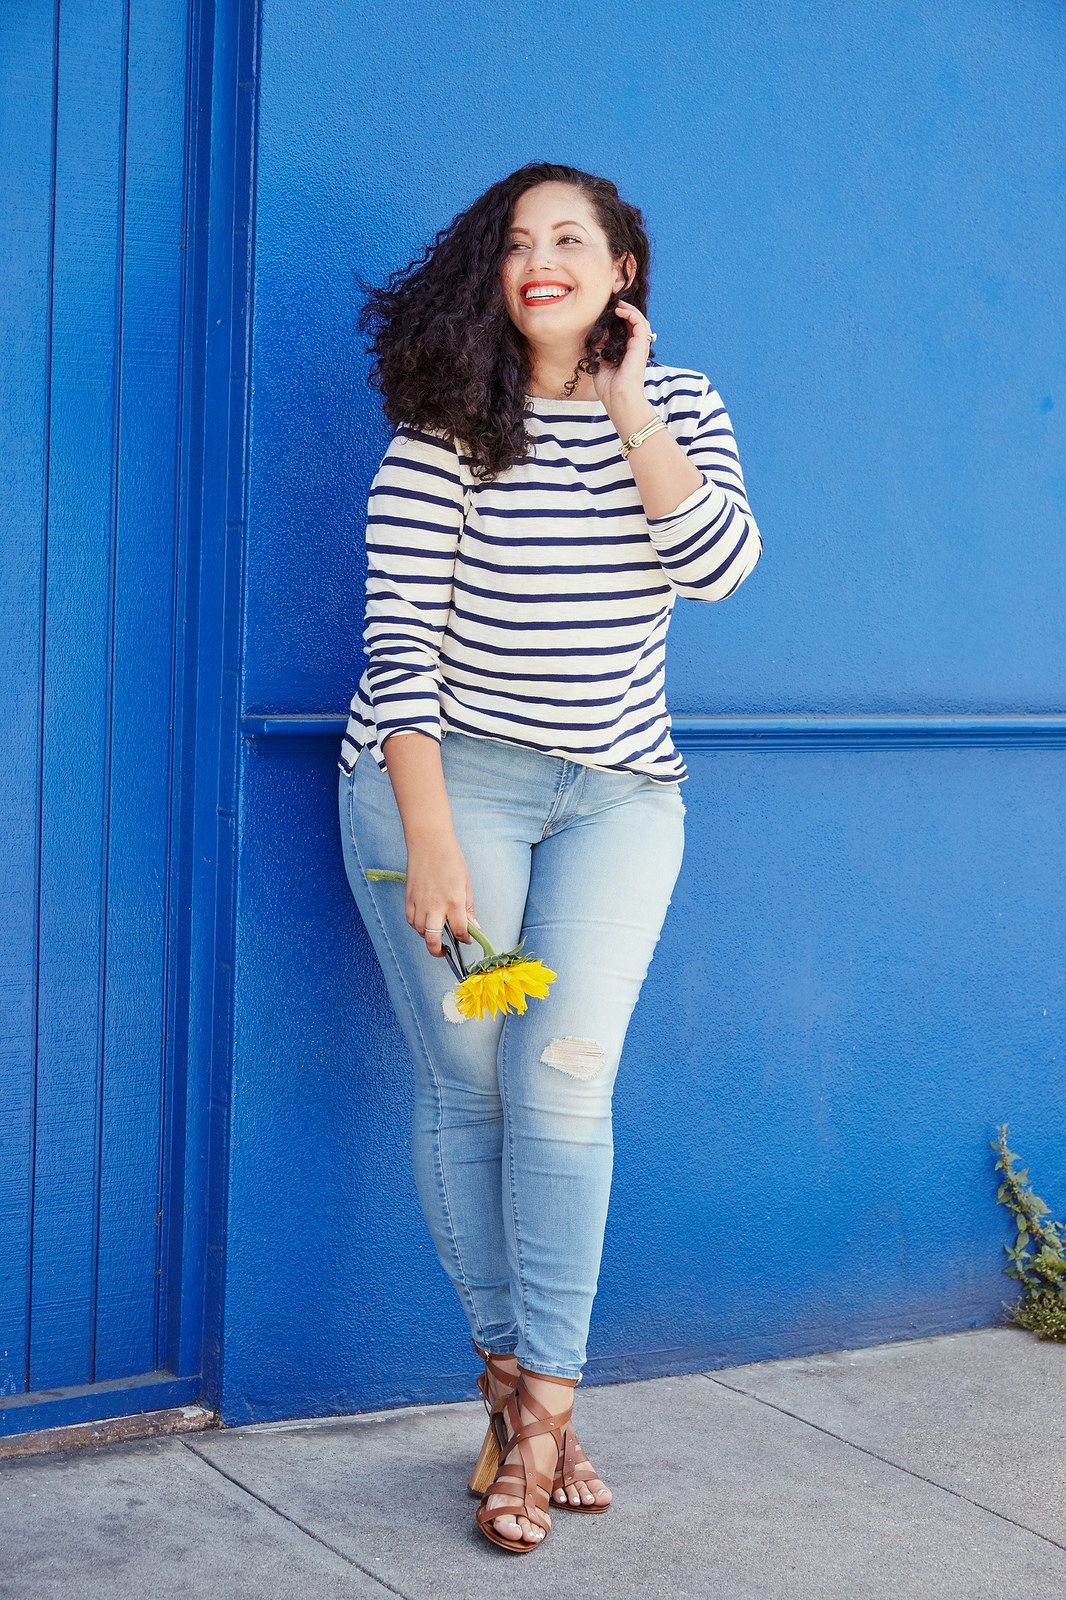 Tanesha Awasthi (also known as Girl With Curves) stars in Old Navy denim campaign wearing a stripe tee and skinny jeans in San Francisco, CA.